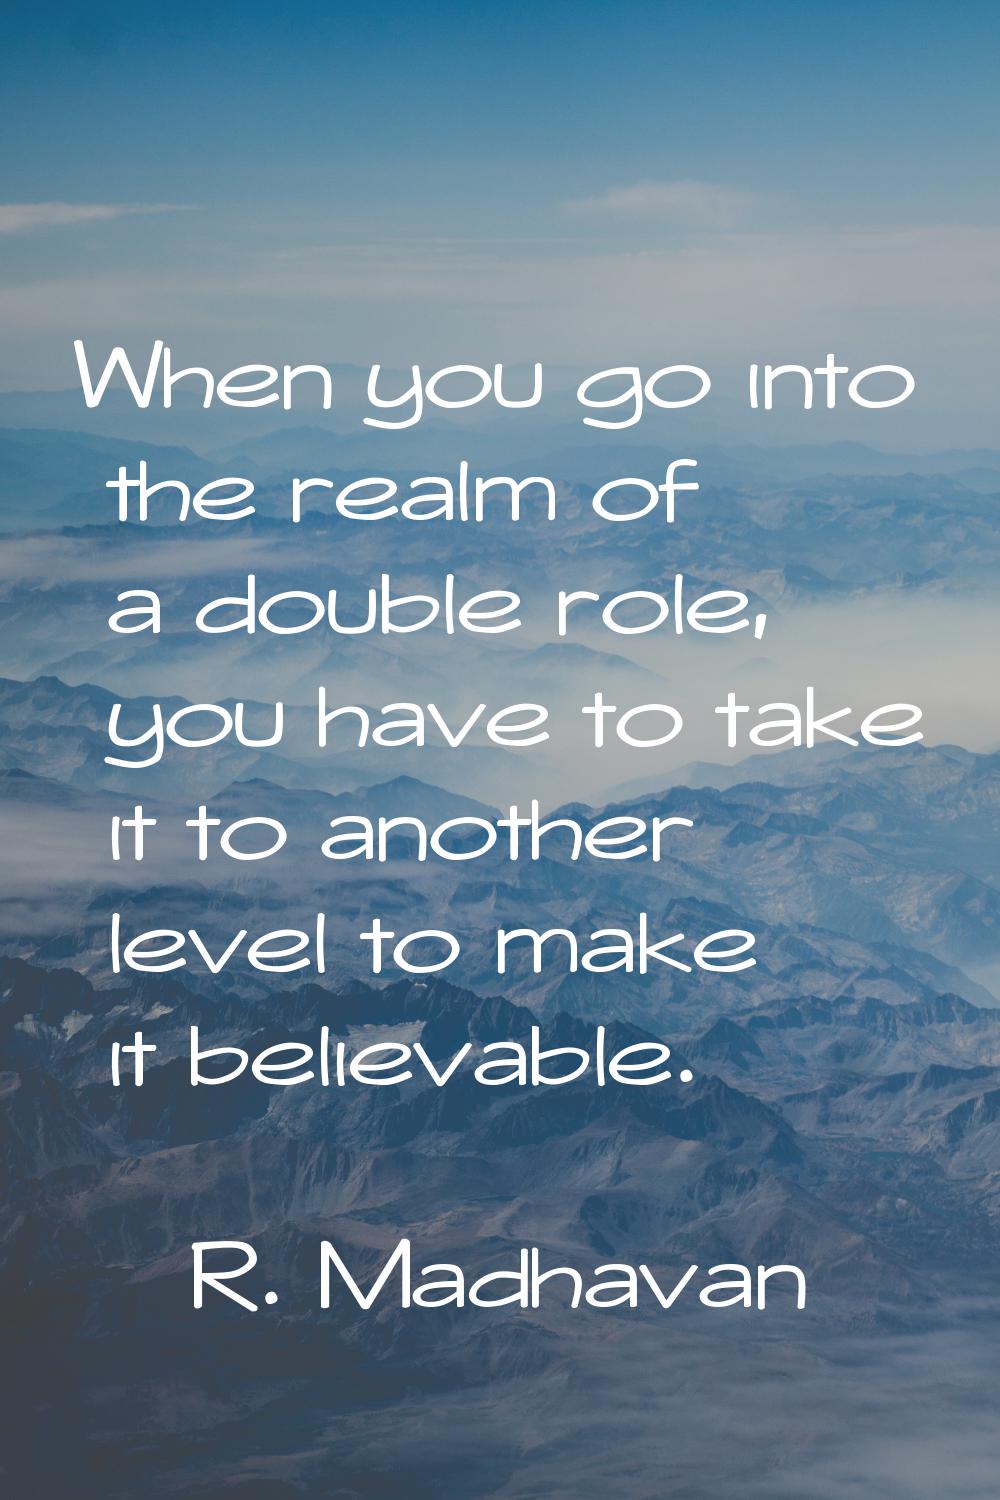 When you go into the realm of a double role, you have to take it to another level to make it believ